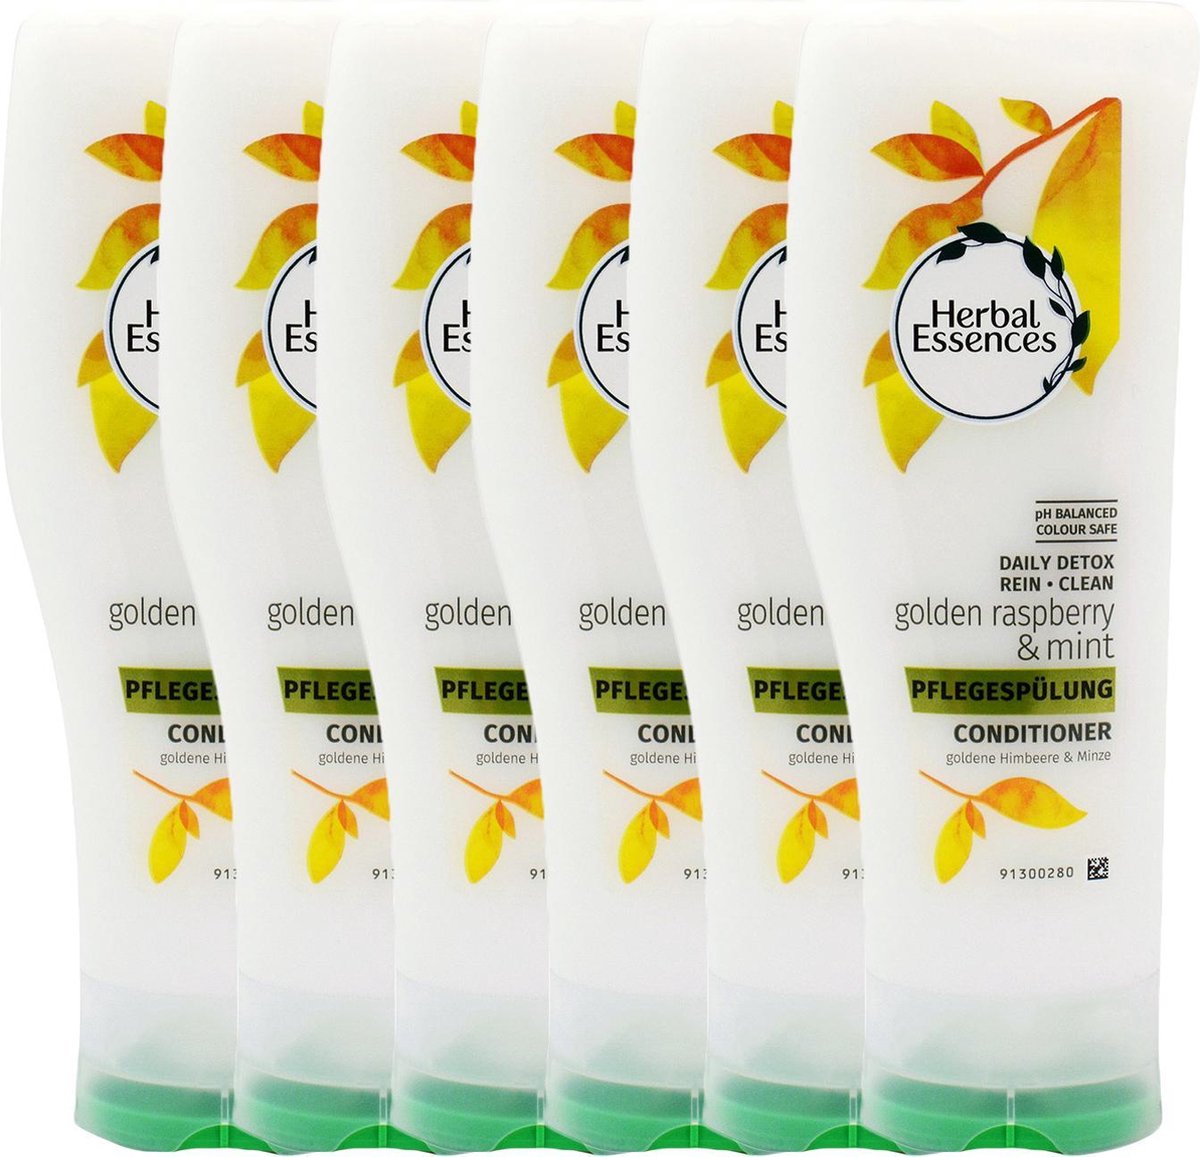 Herbal Essences Conditioner - Daily Detox Clean - 6 x 400 ml